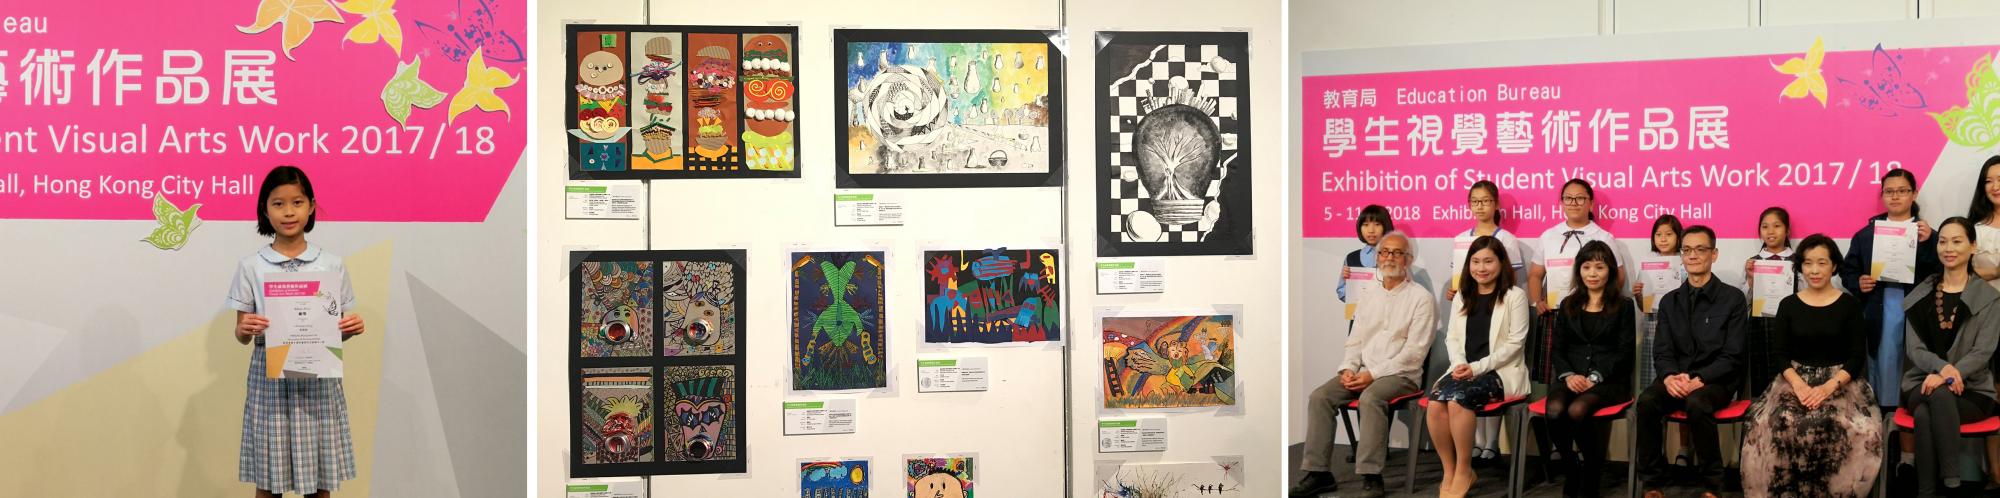 Students were awarded Silver and Merit Prize, and their works were exhibited at the Exhibition of Student Visual Arts Work by the Education Bureau